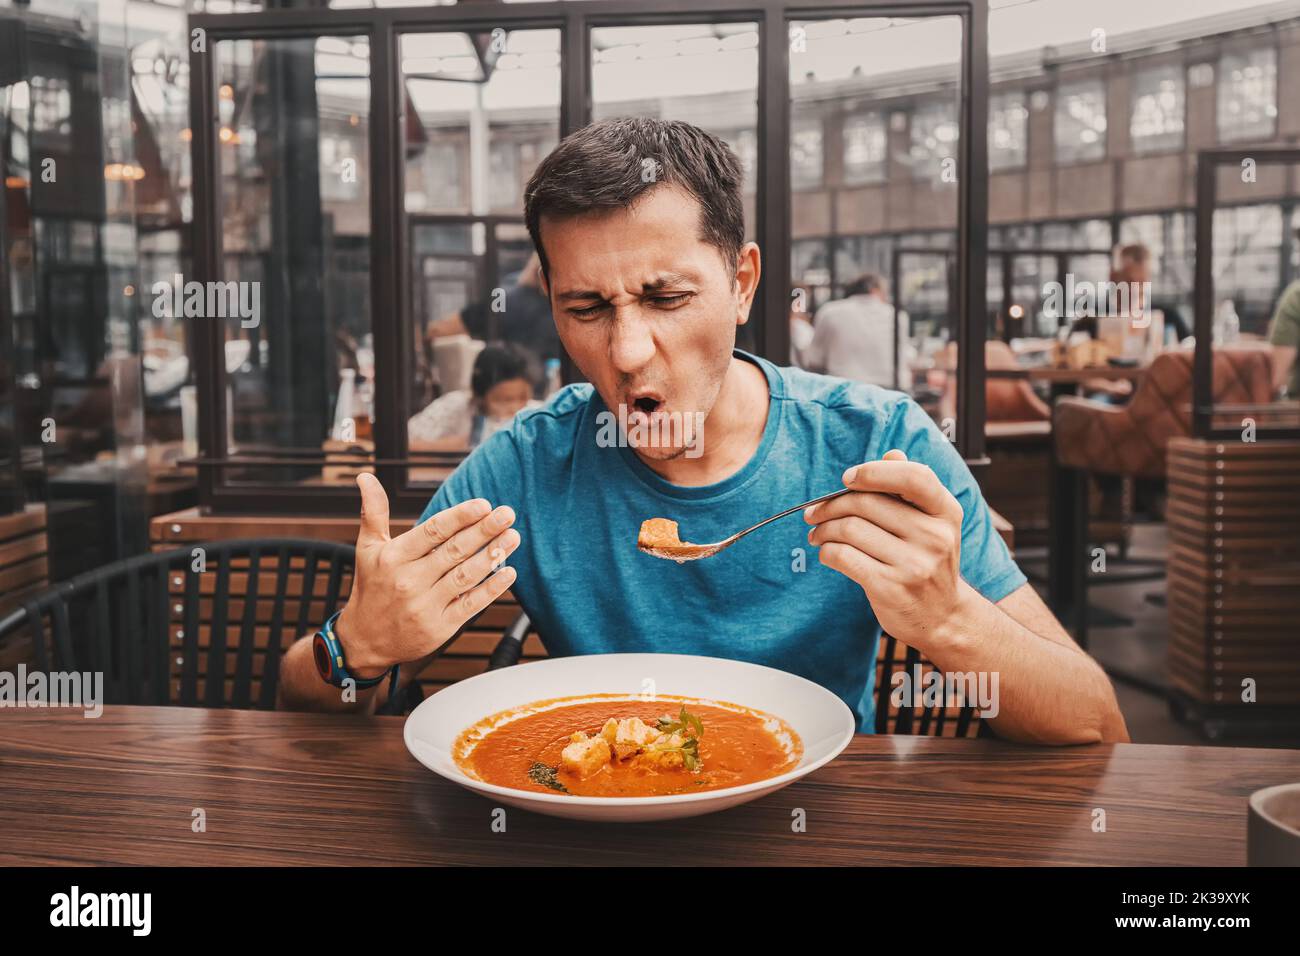 A man tries a spicy and hot red soup in a restaurant and reacts funny emotionally. Seasonings in the national cuisine and an unhealthy diet with overa Stock Photo